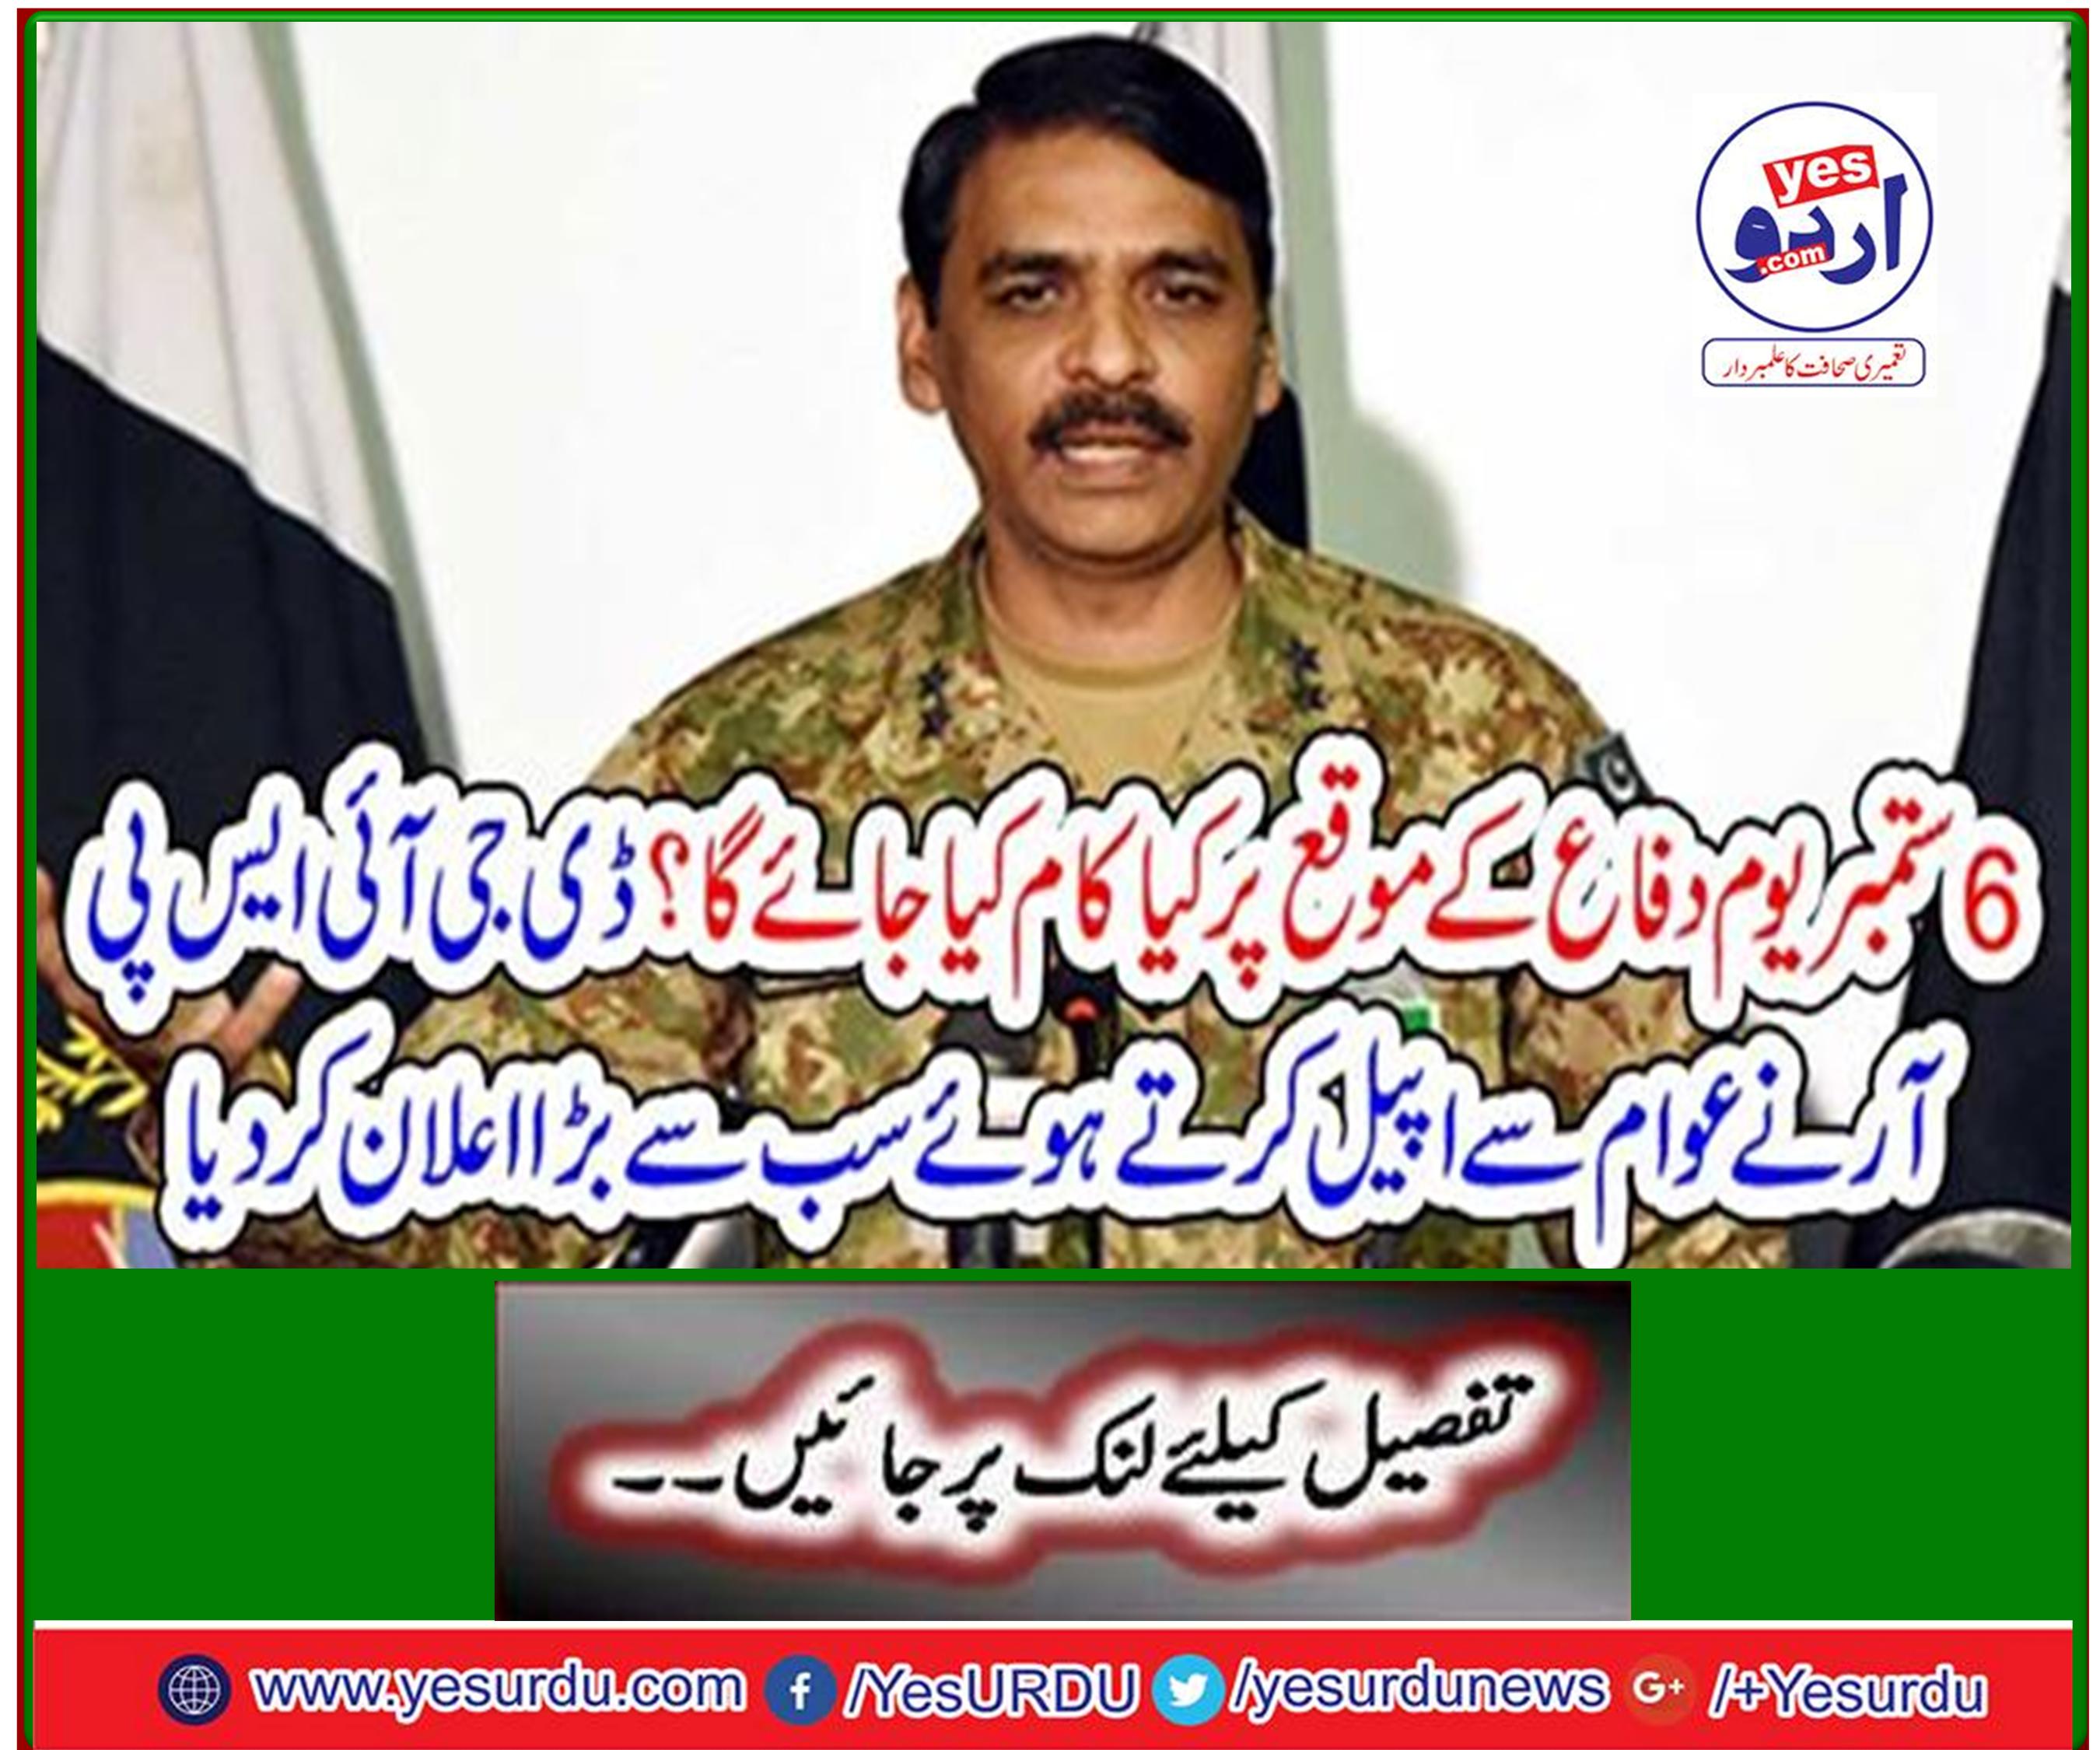 DGISPR made the biggest announcement by appealing to the public